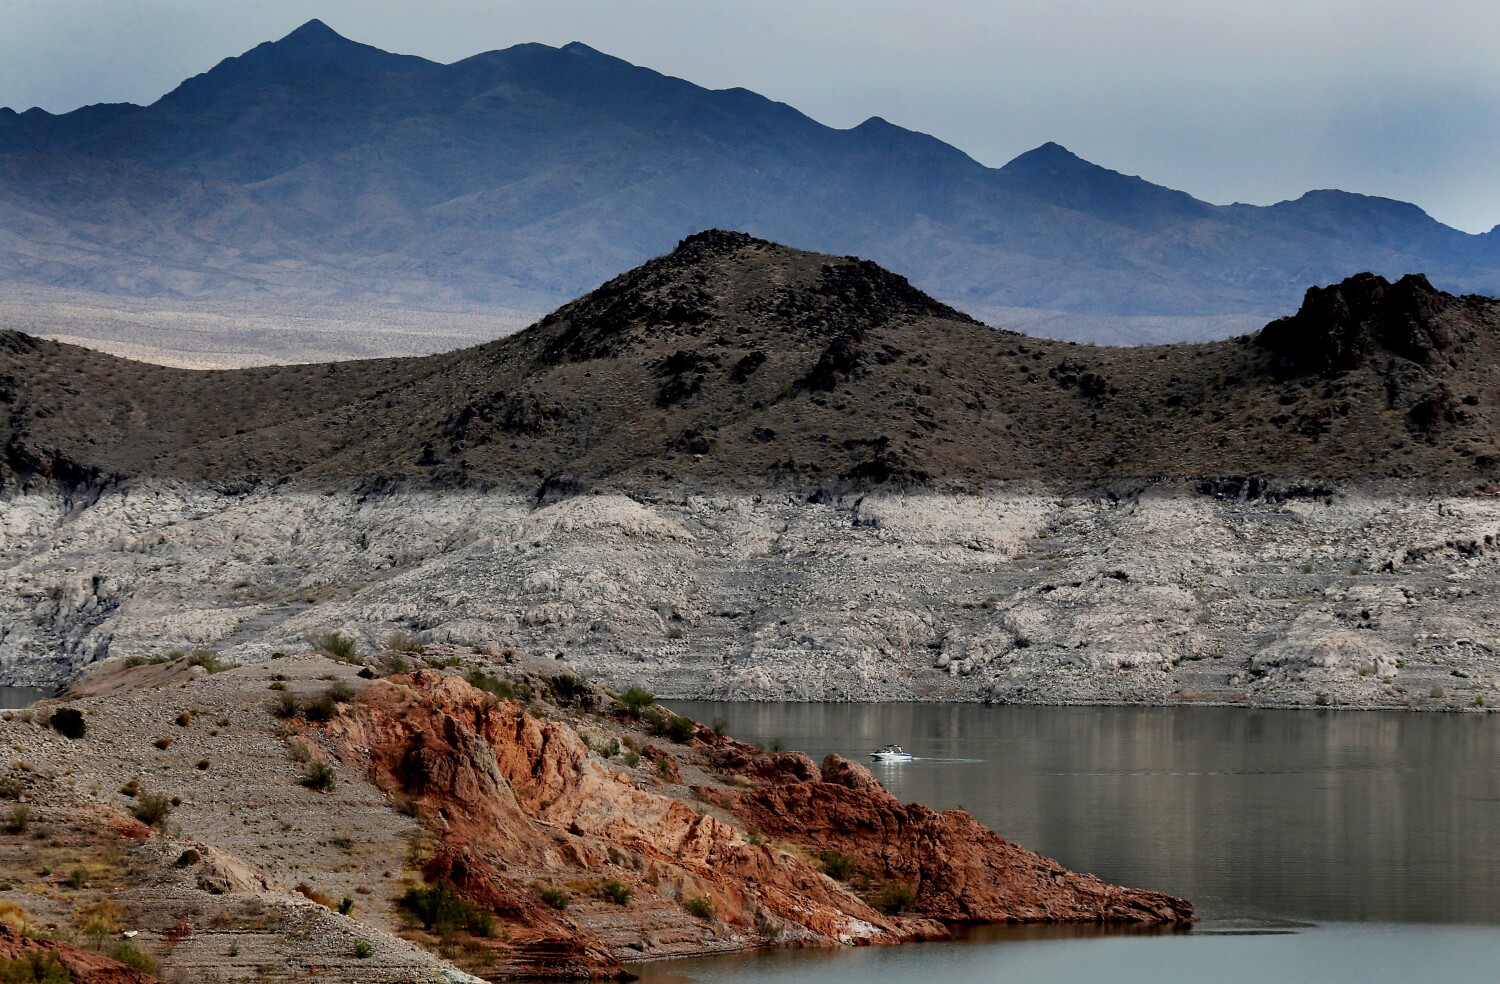 More human remains found in receding Lake Mead